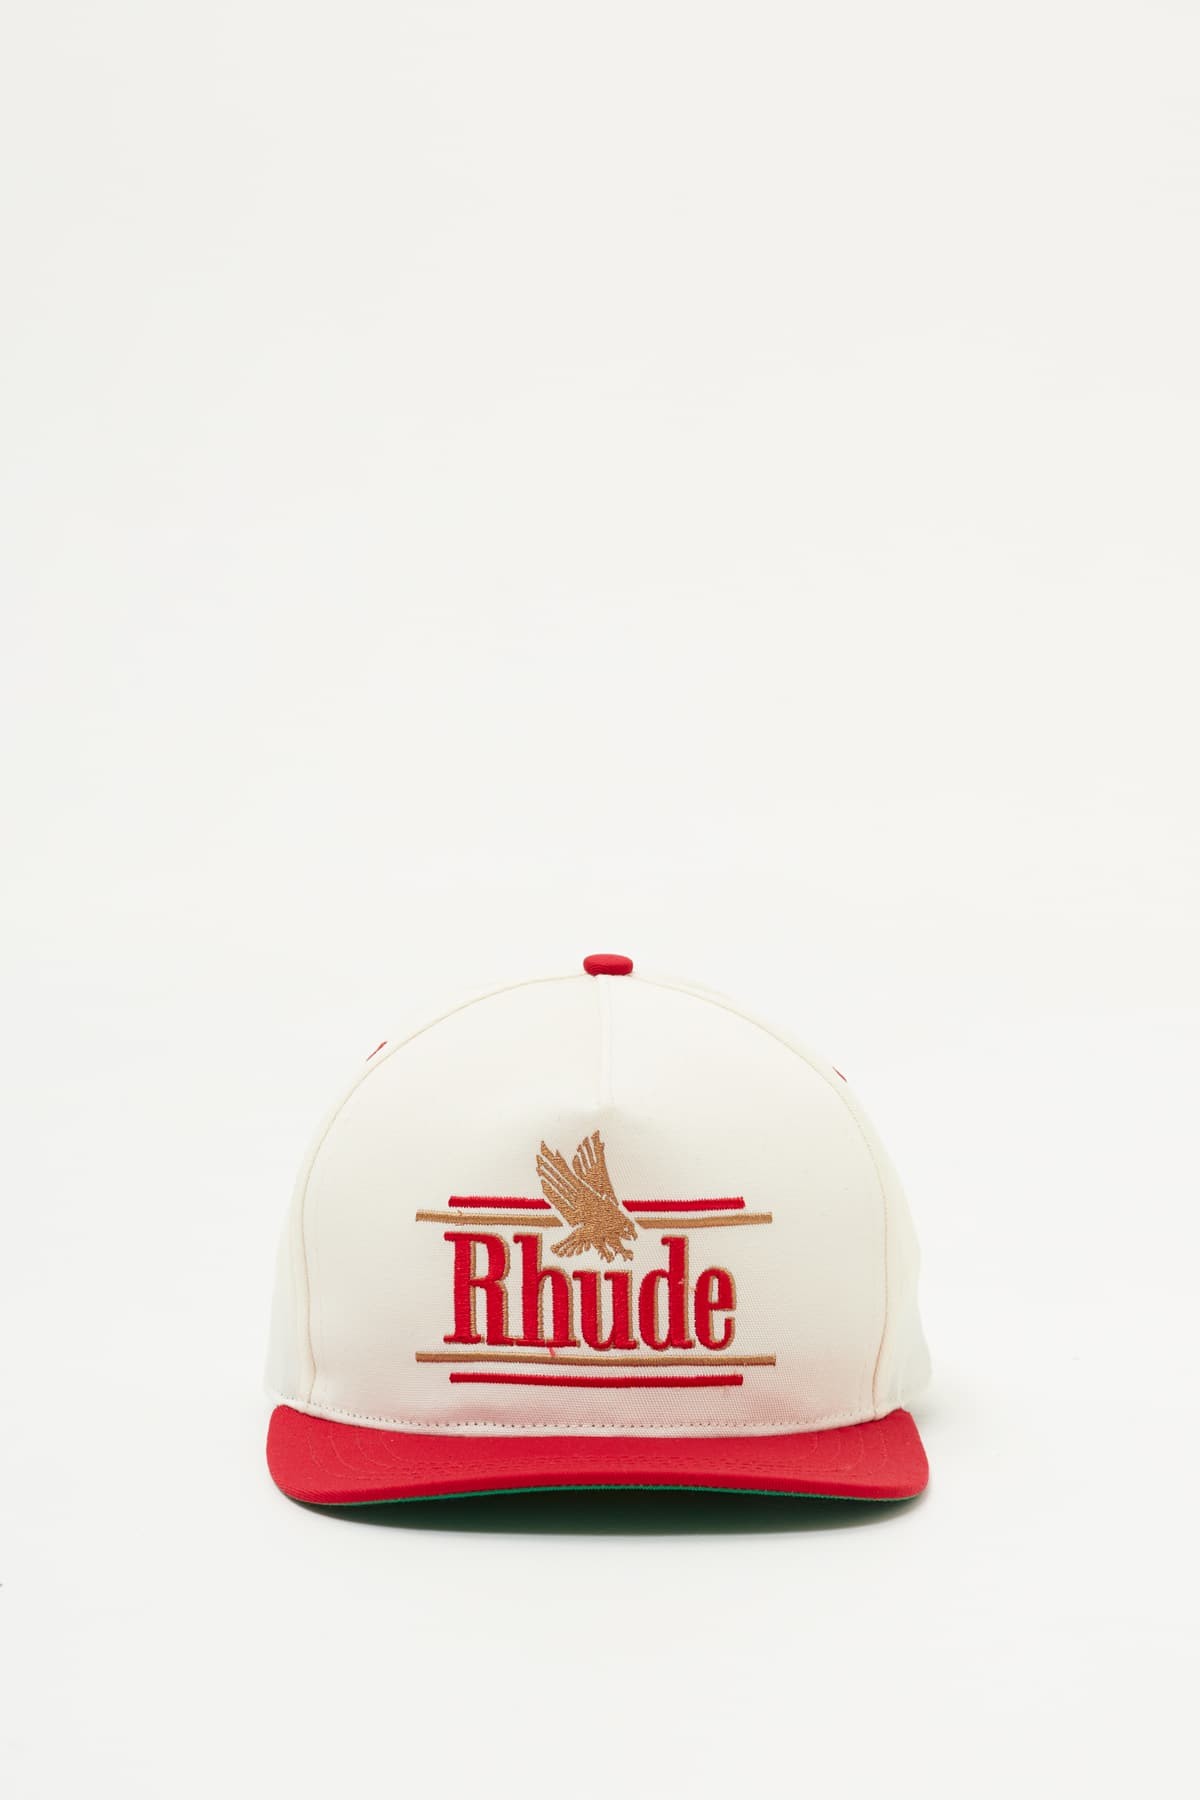 RHUDE VORY RED ROSSA STRUCTURED HAT IAMNUE